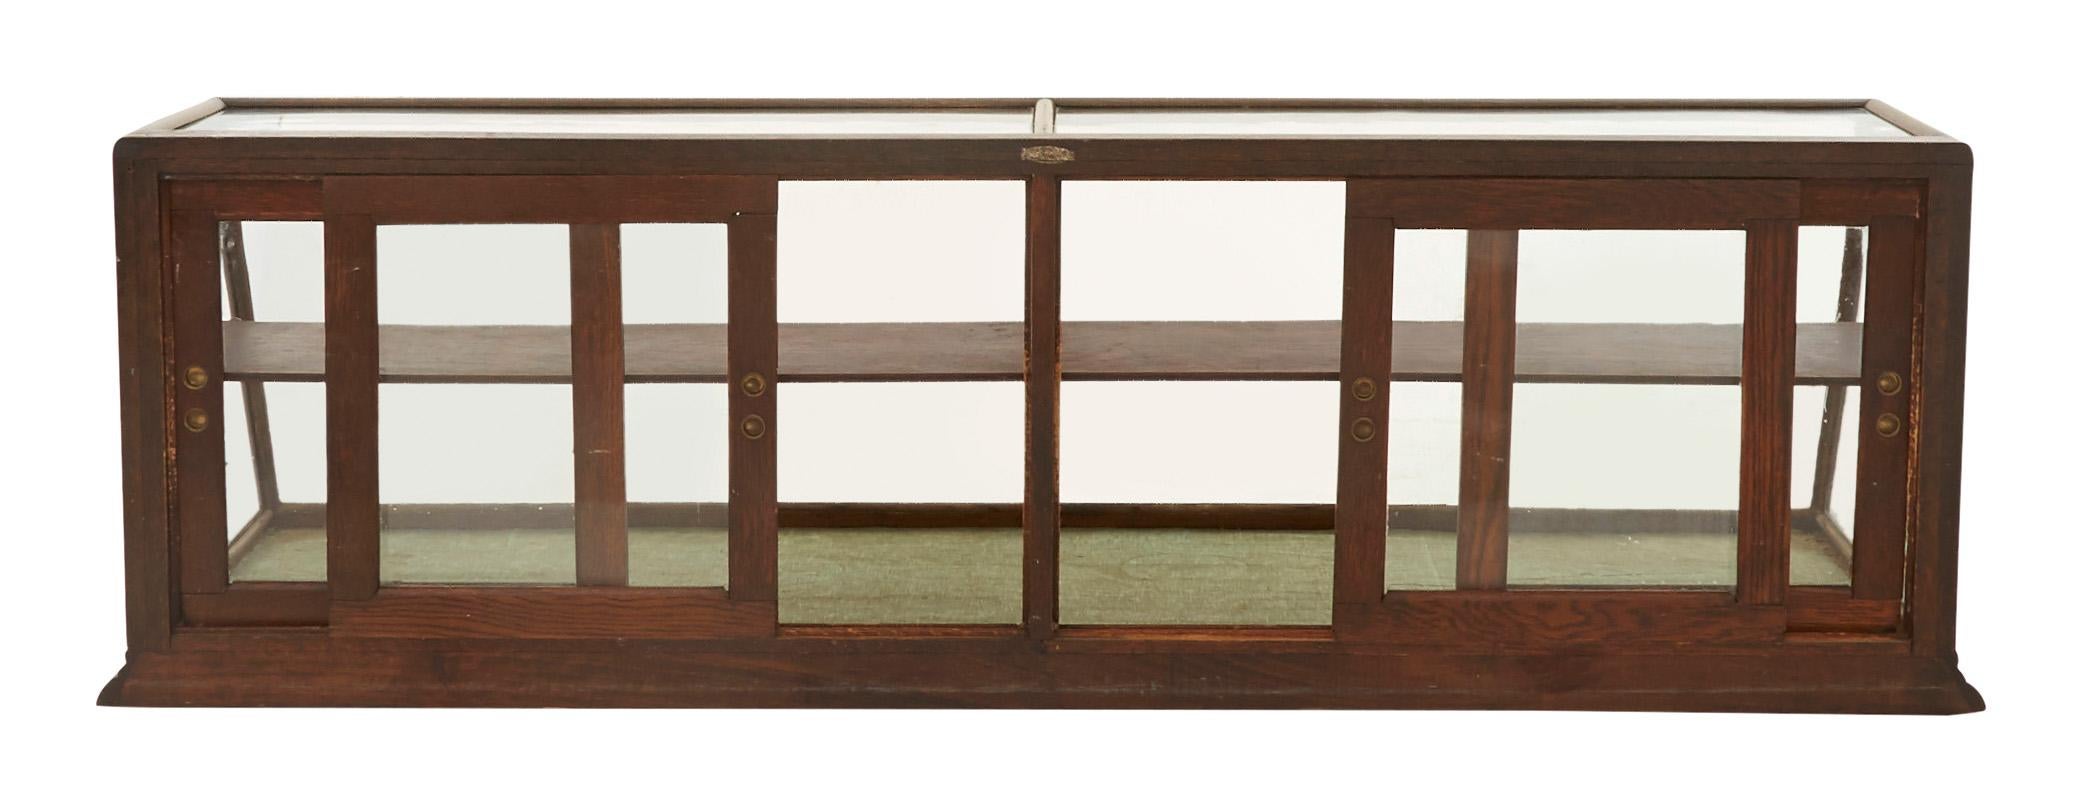 American Early 20th Century Glass and Oak Tabletop Display Case For Sale